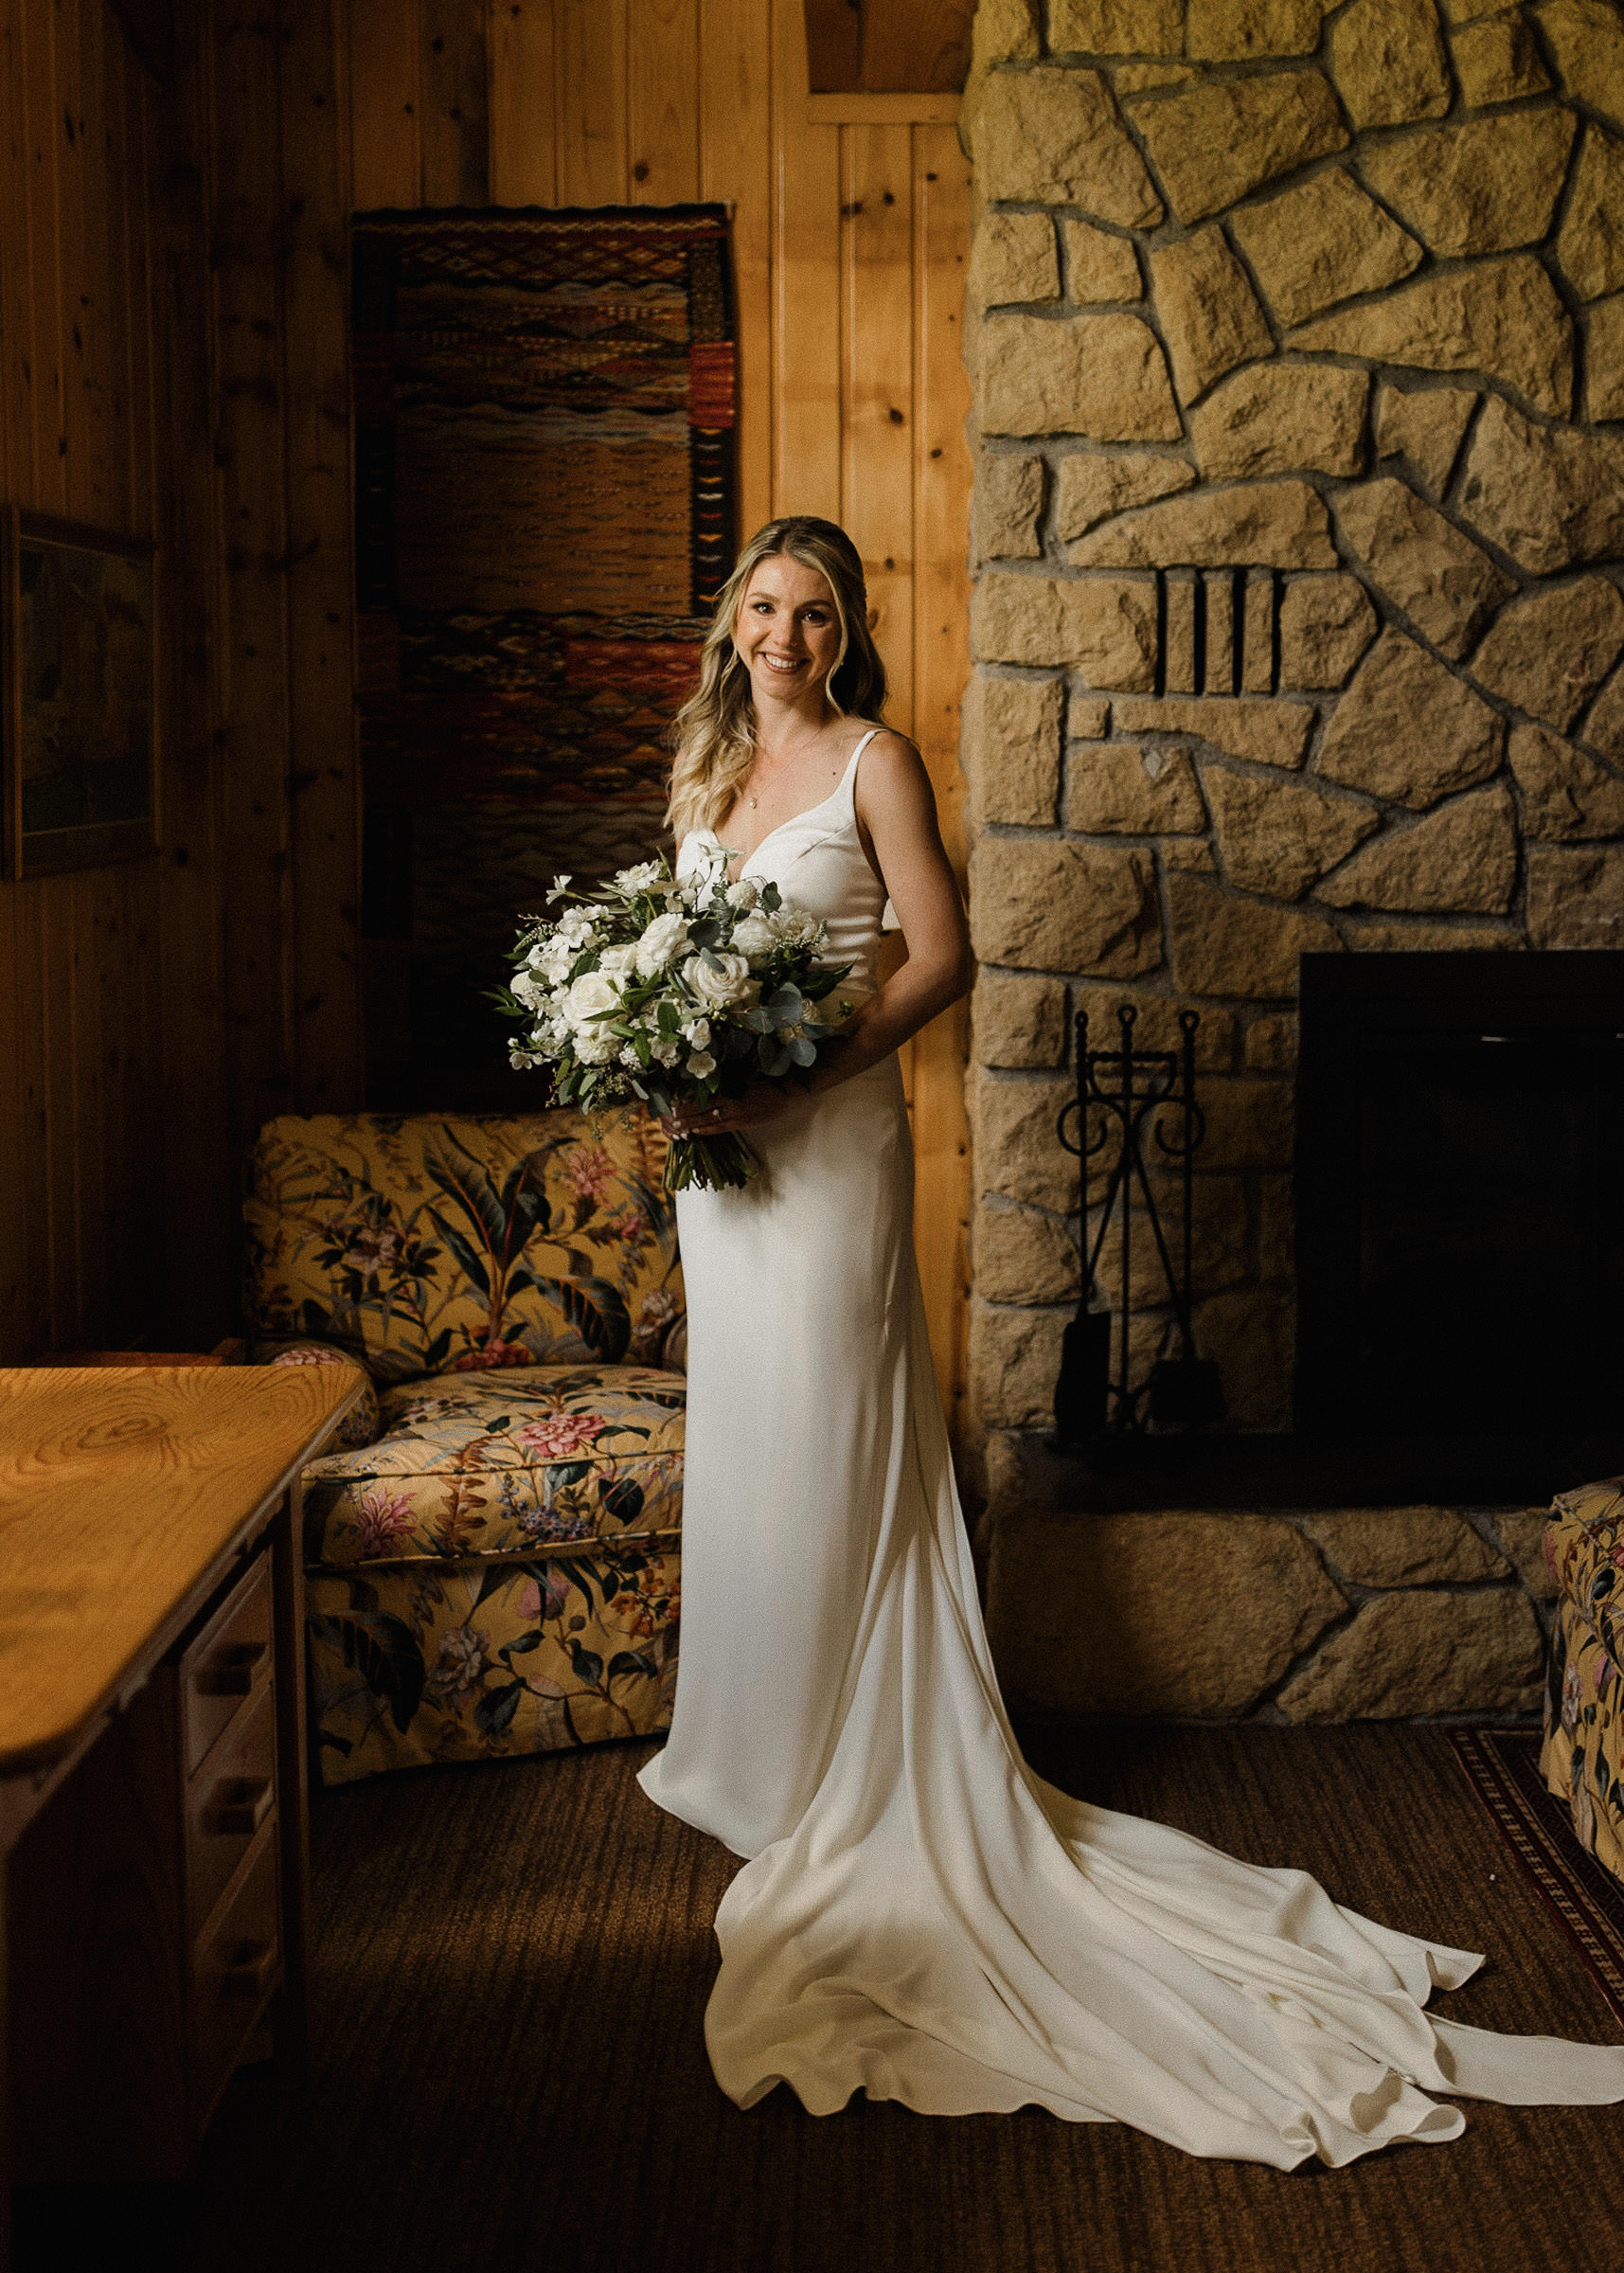 Bride poses for a portrait near a window inside the bridal suite at House on the Metolius